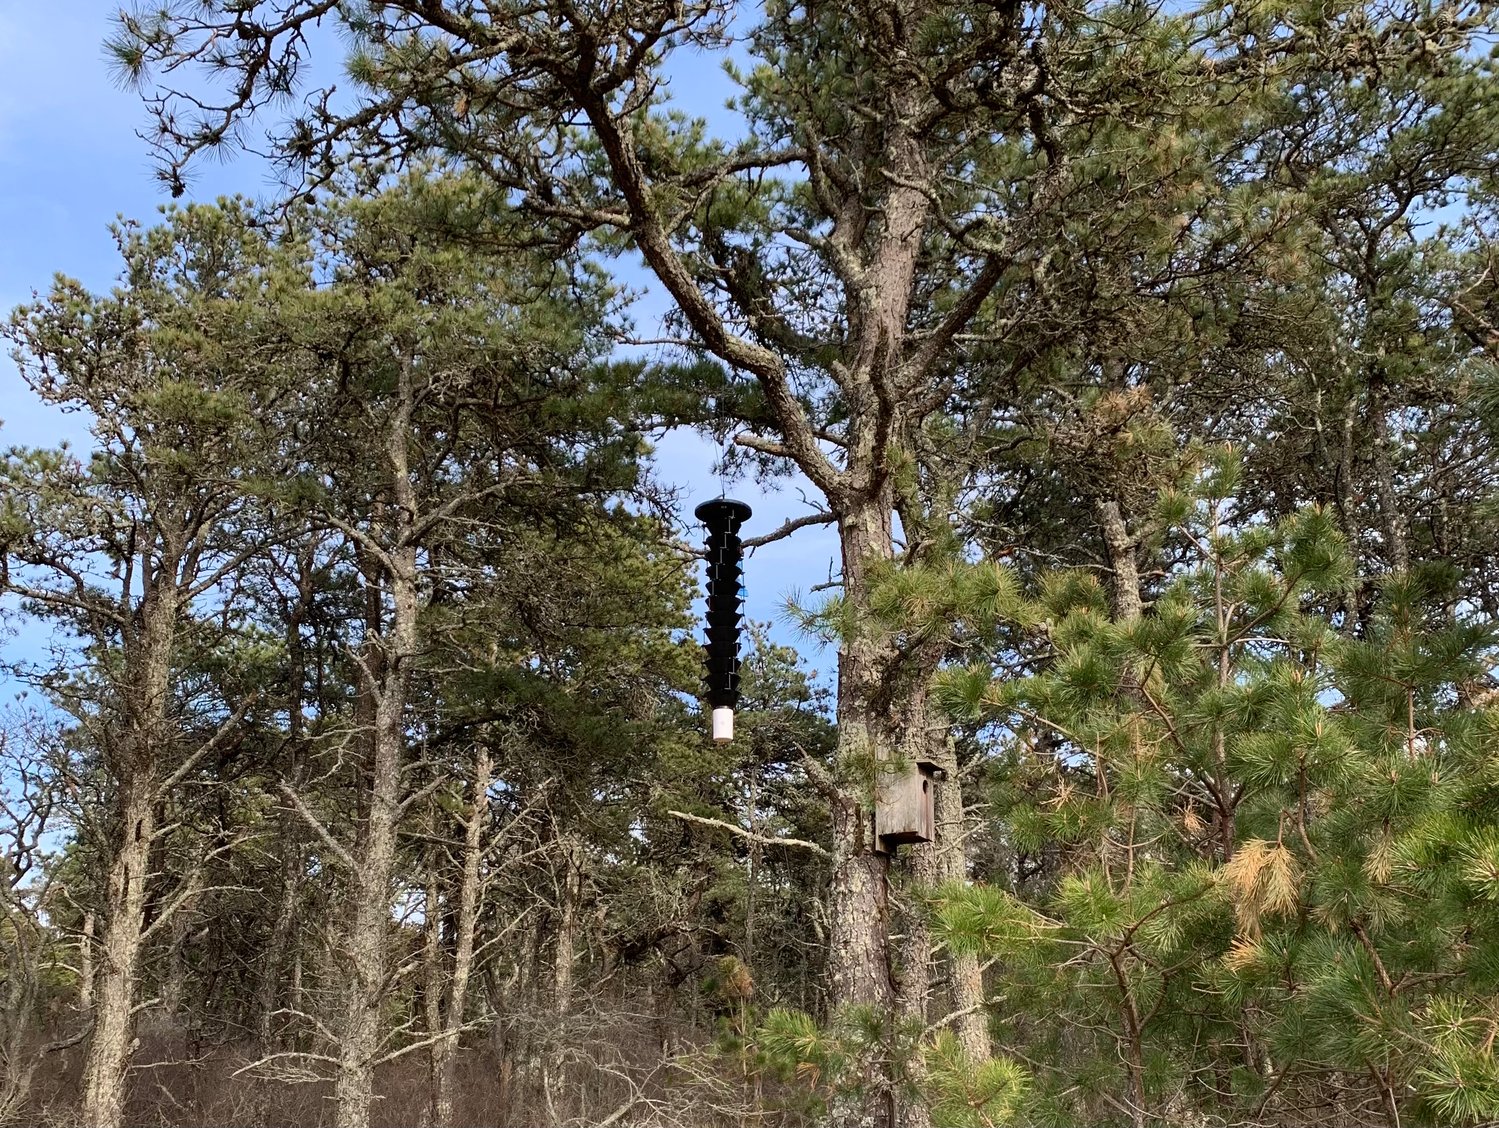 The Nantucket Conservation Foundation set up three traps for the beetles this spring, at Head of the Plains, on Wannacomet Water Company property and at Gardner Farm.